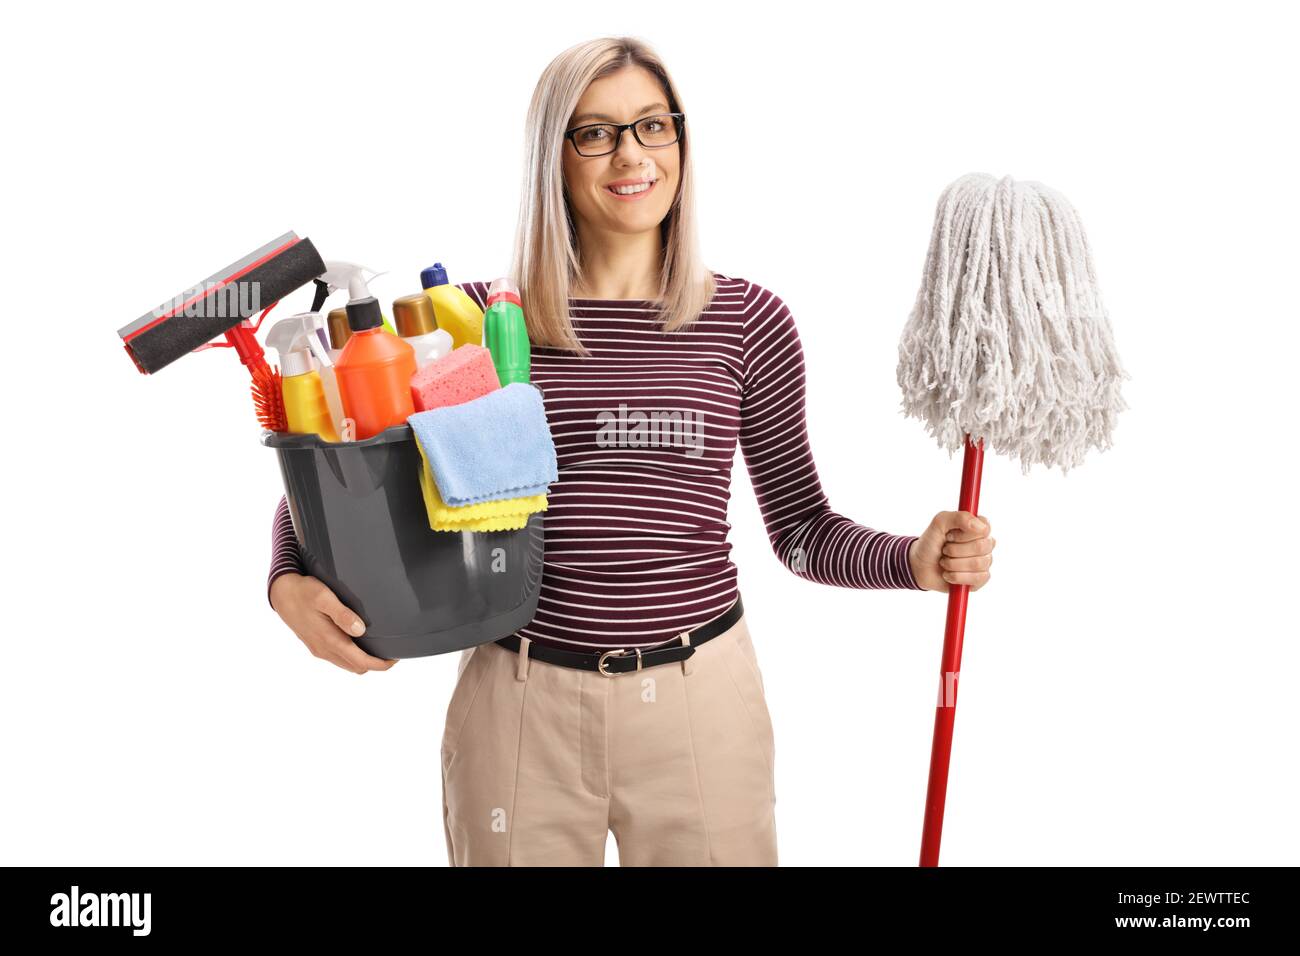 https://c8.alamy.com/comp/2EWTTEC/woman-holding-a-bucket-with-cleaning-supplies-and-a-cleaning-mop-isolated-on-white-background-2EWTTEC.jpg